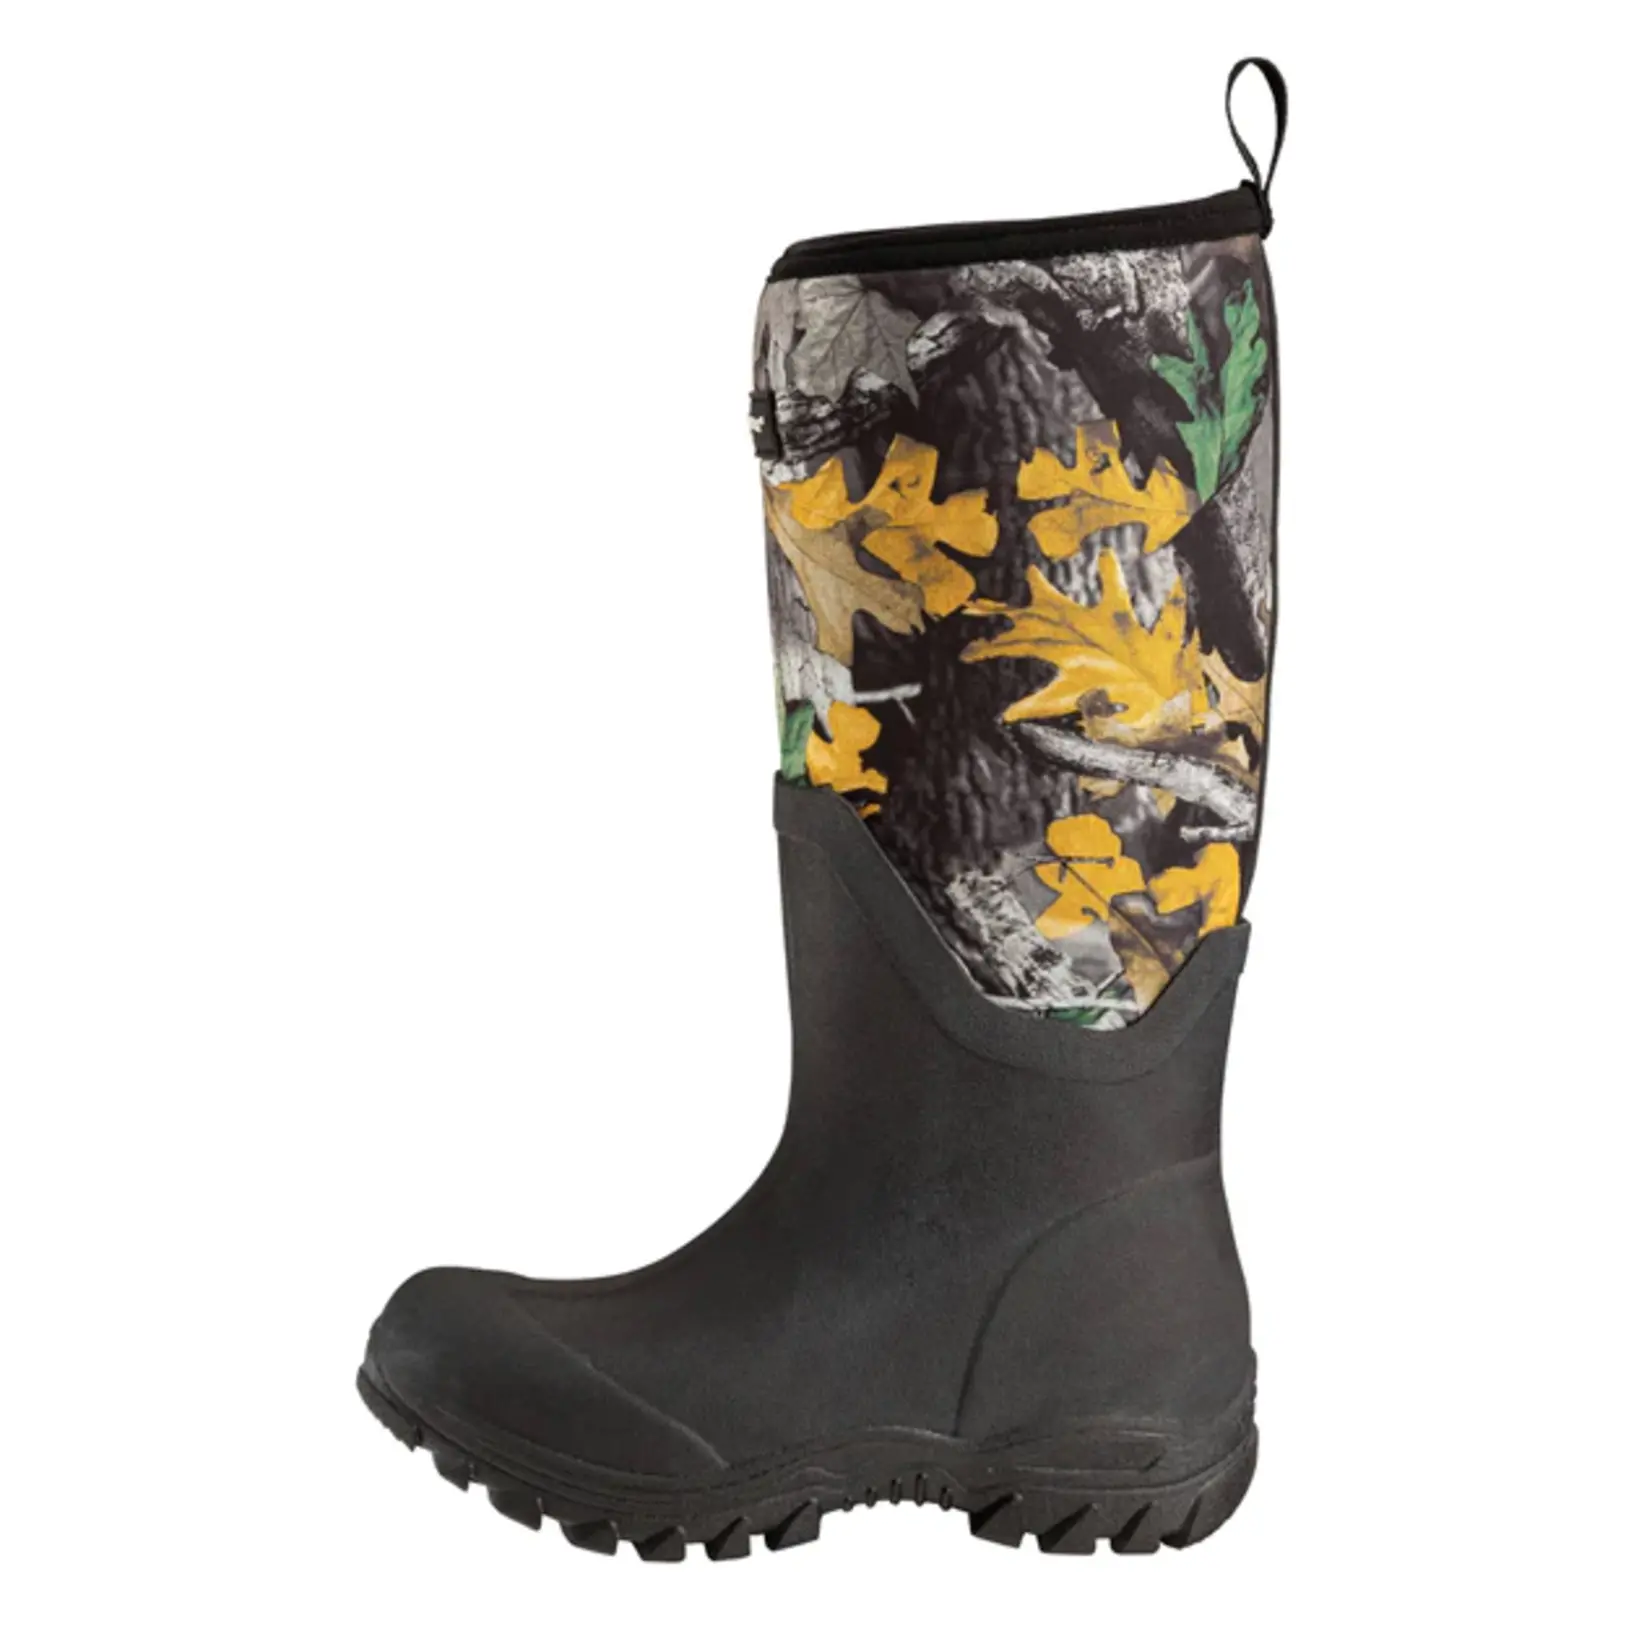 Bottes Buckland Neo Trail Femme Camouflage